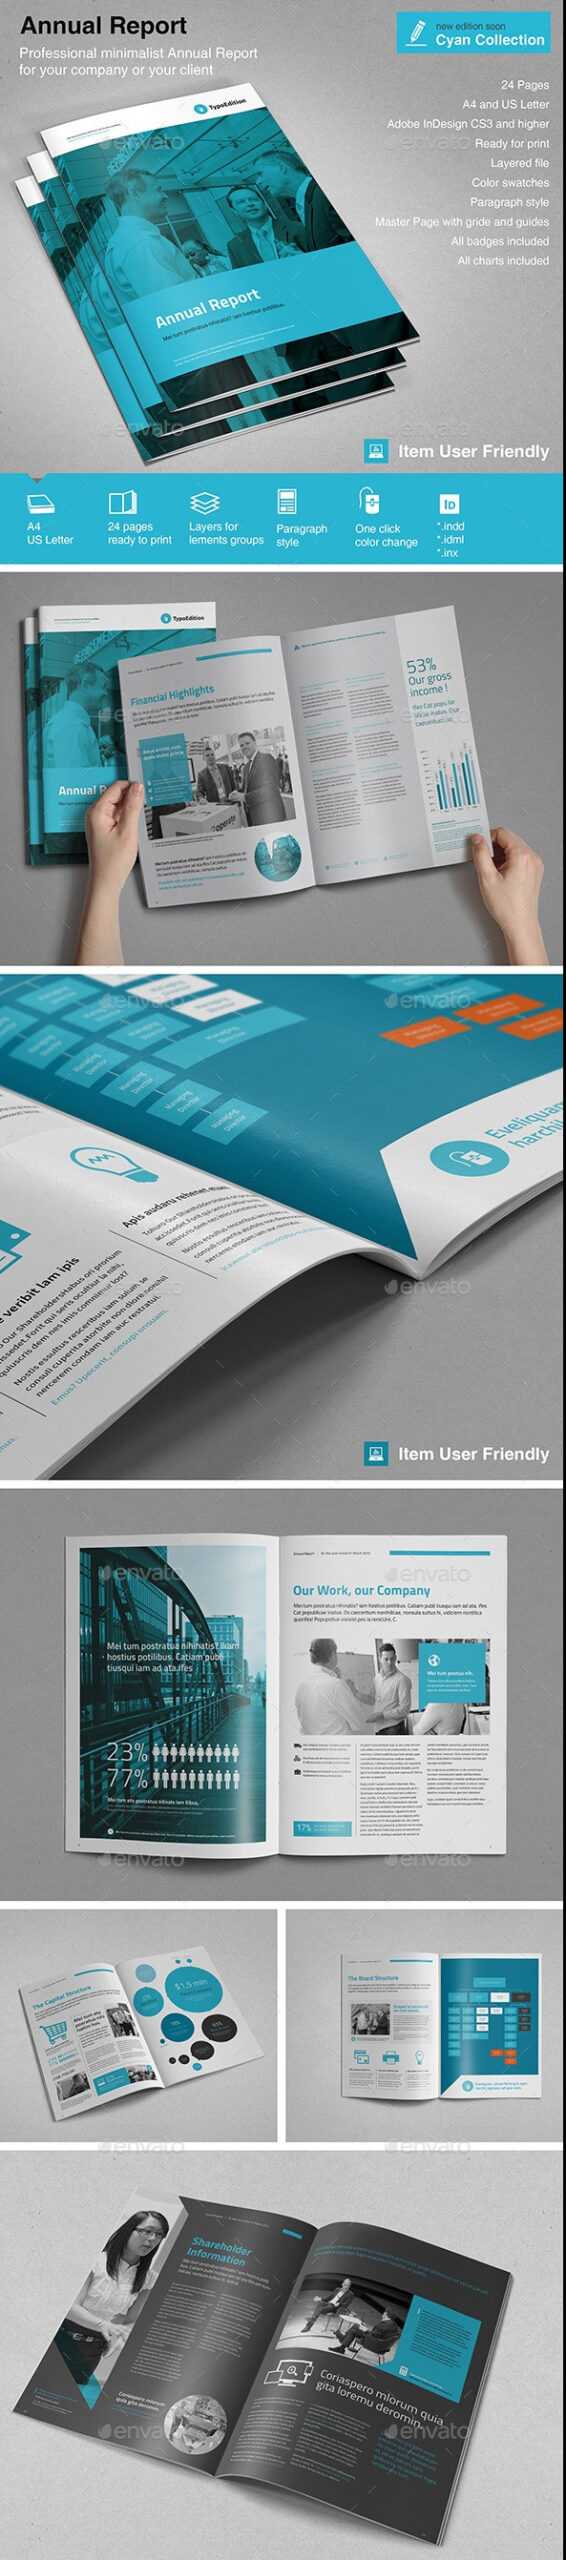 32+ Indesign Annual Report Templates For Corporate For Free Indesign Report Templates